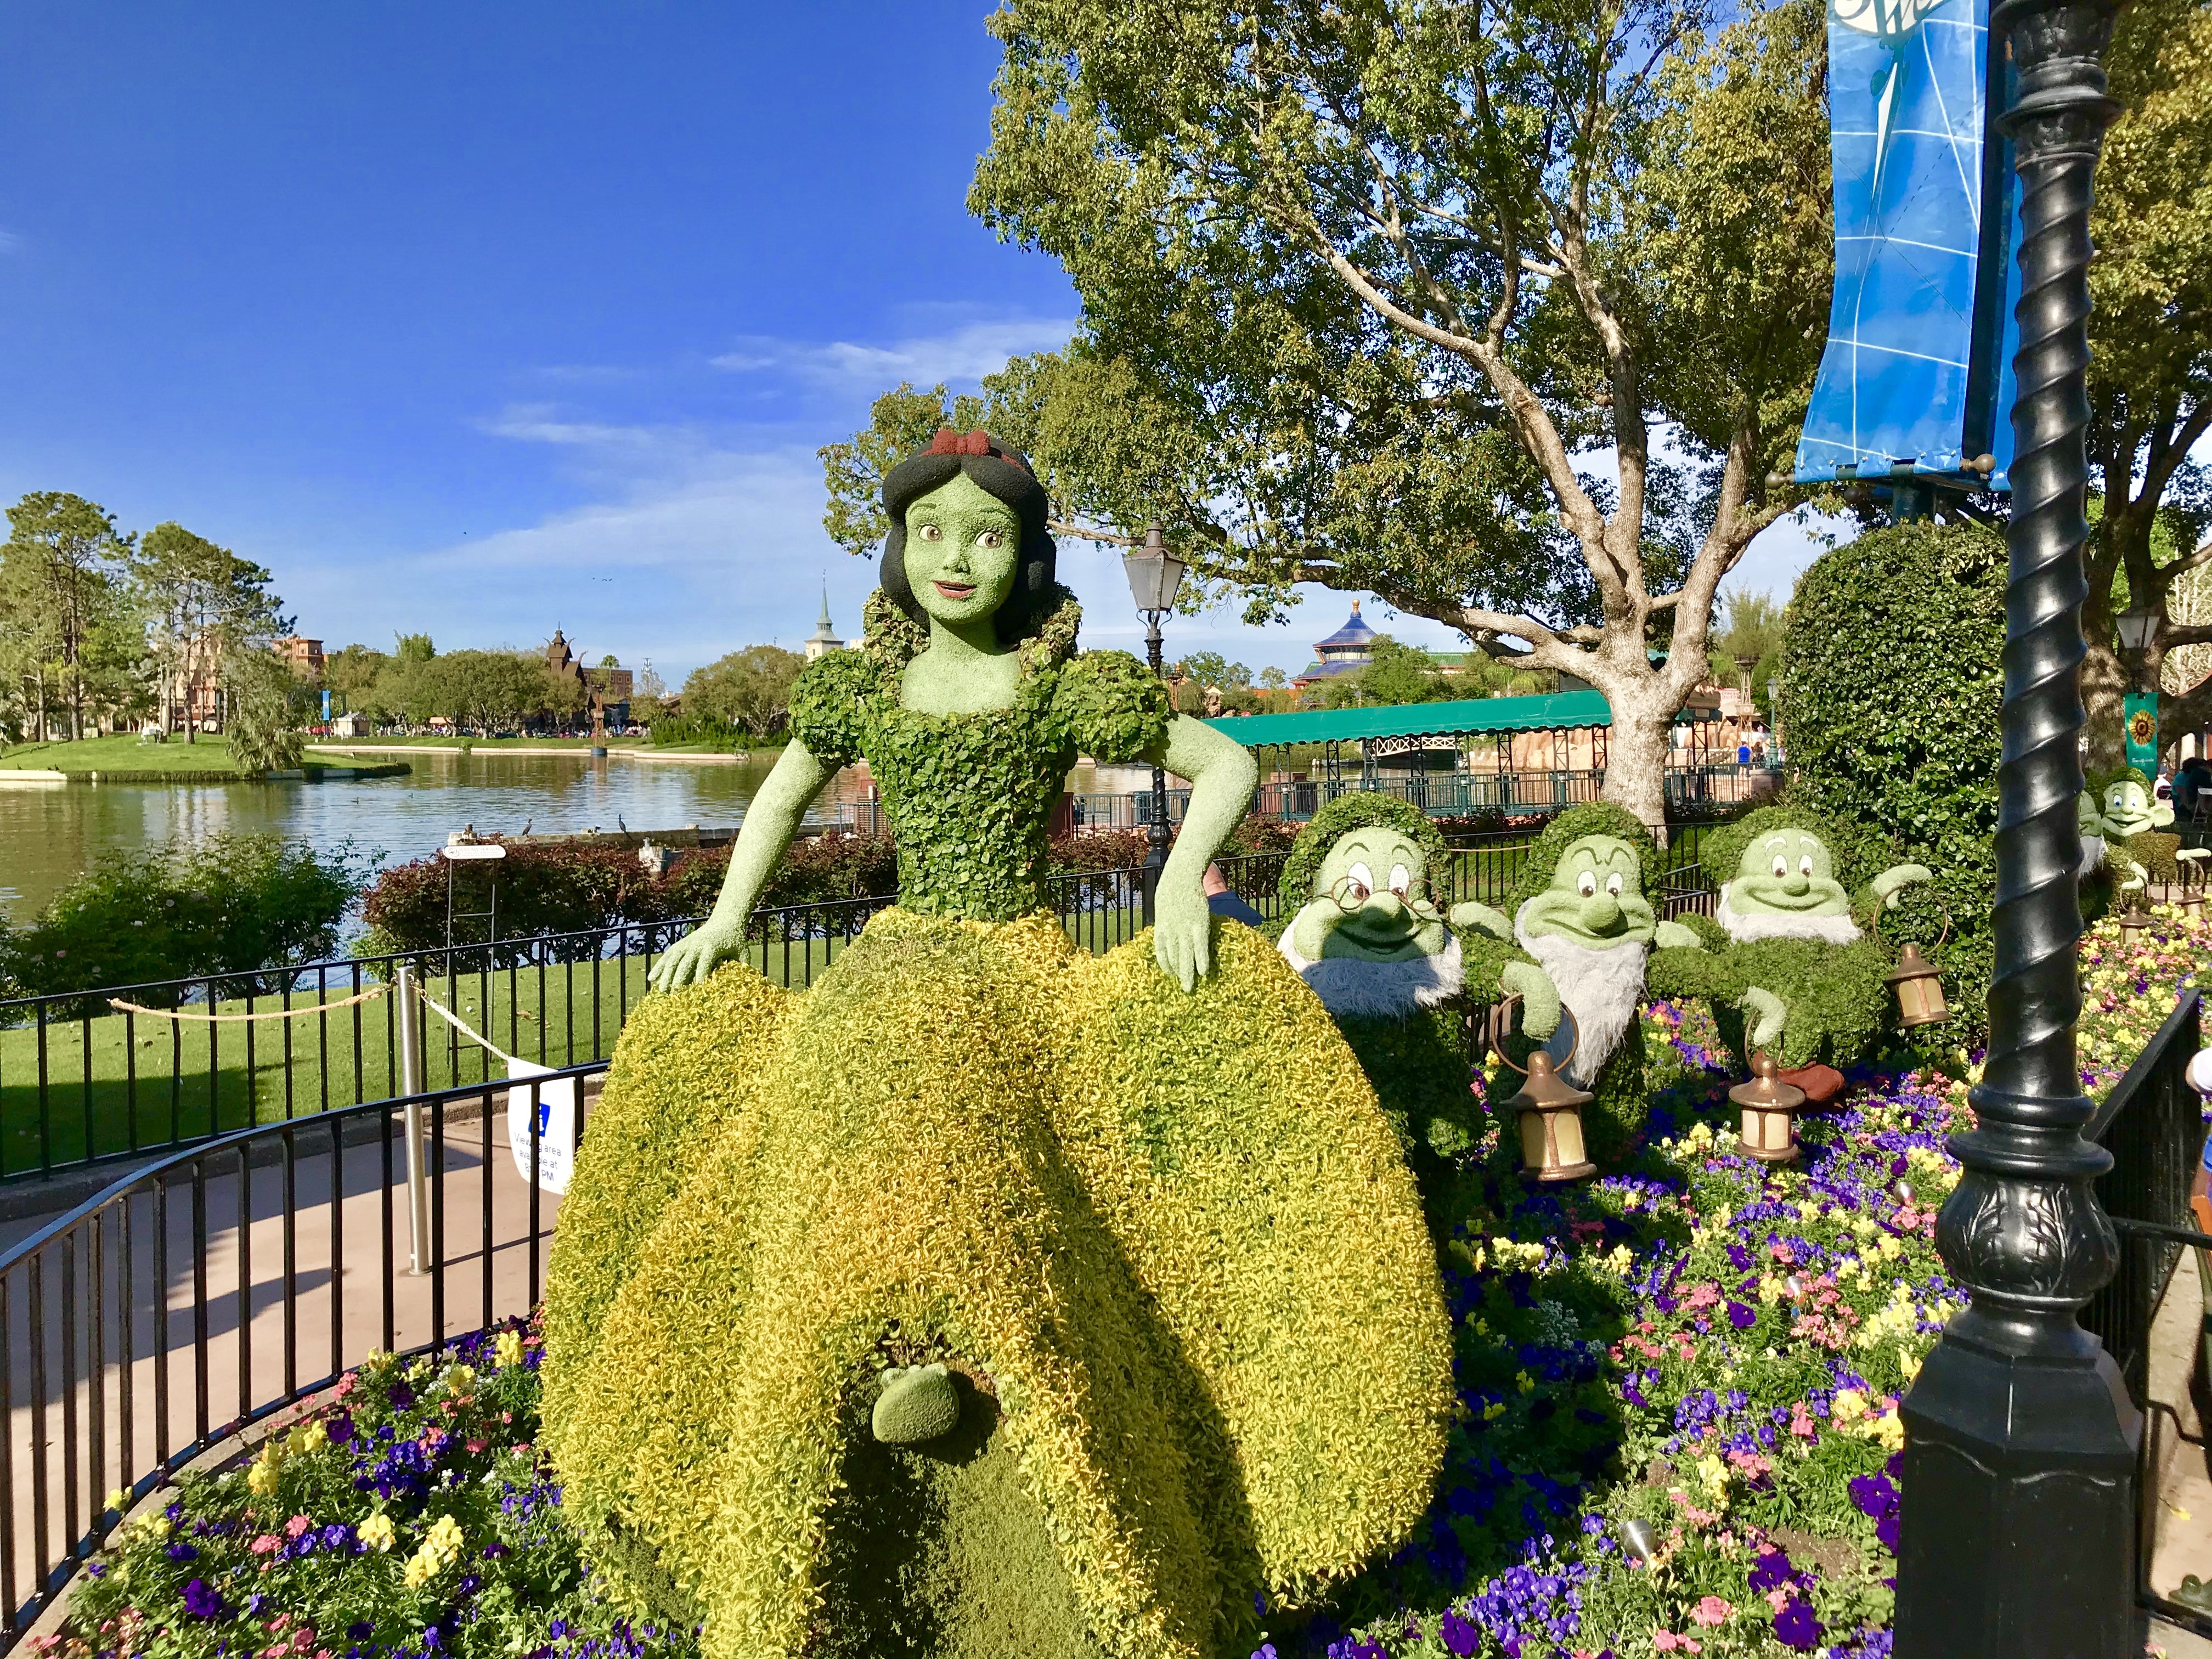 Snow White and Dwarfs at Epcot's 2018 Flower and Garden Festival